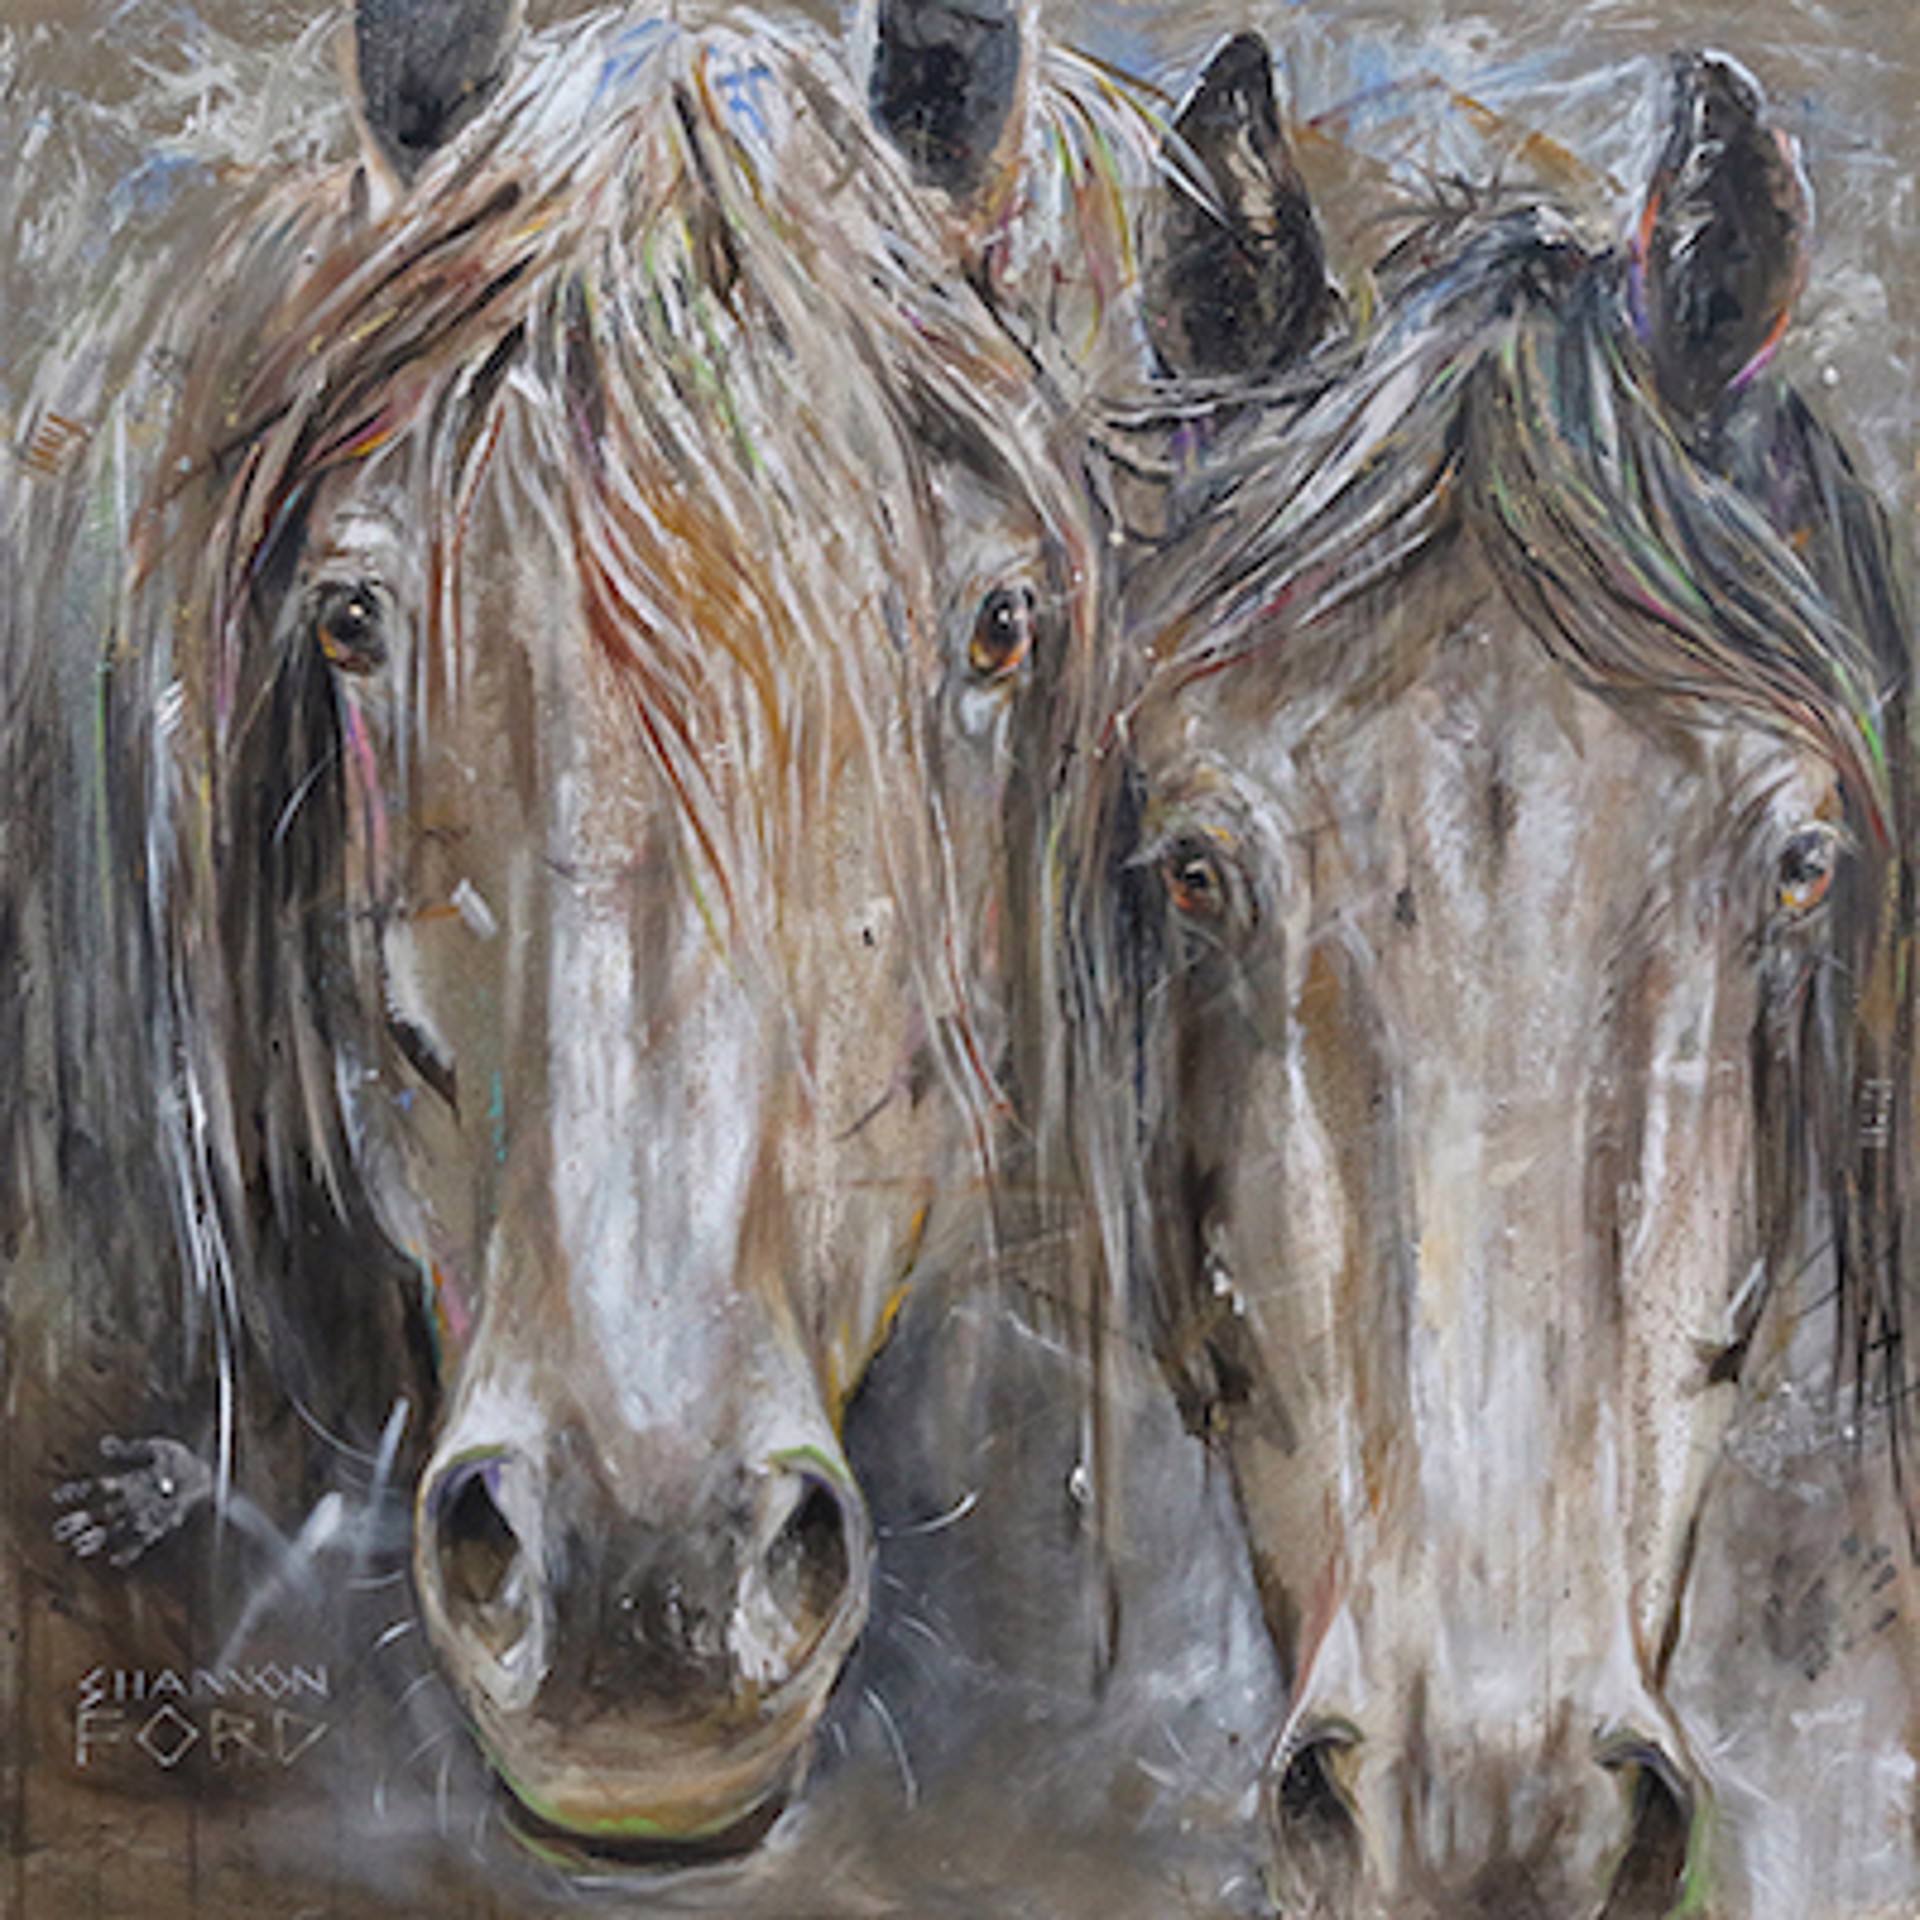 Two Lusitanos by Shannon Ford